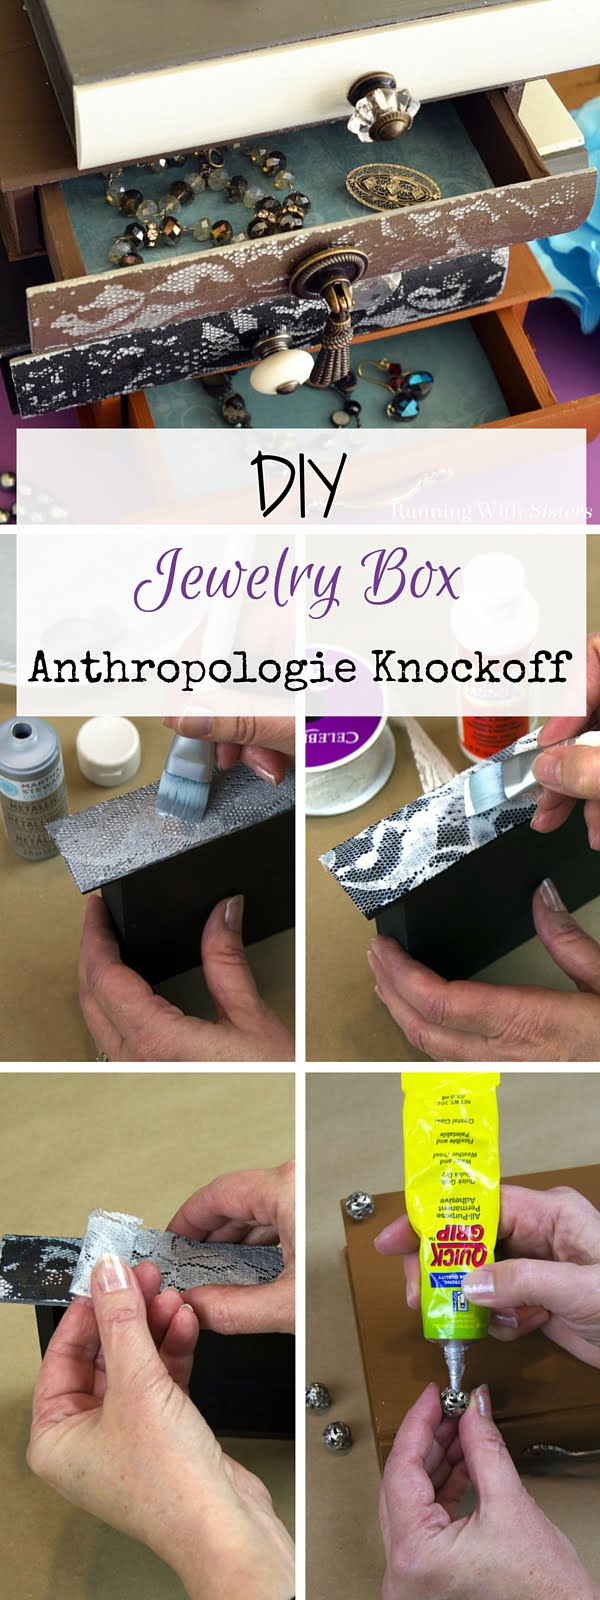 Check out the tutorial:   Jewelry Box  